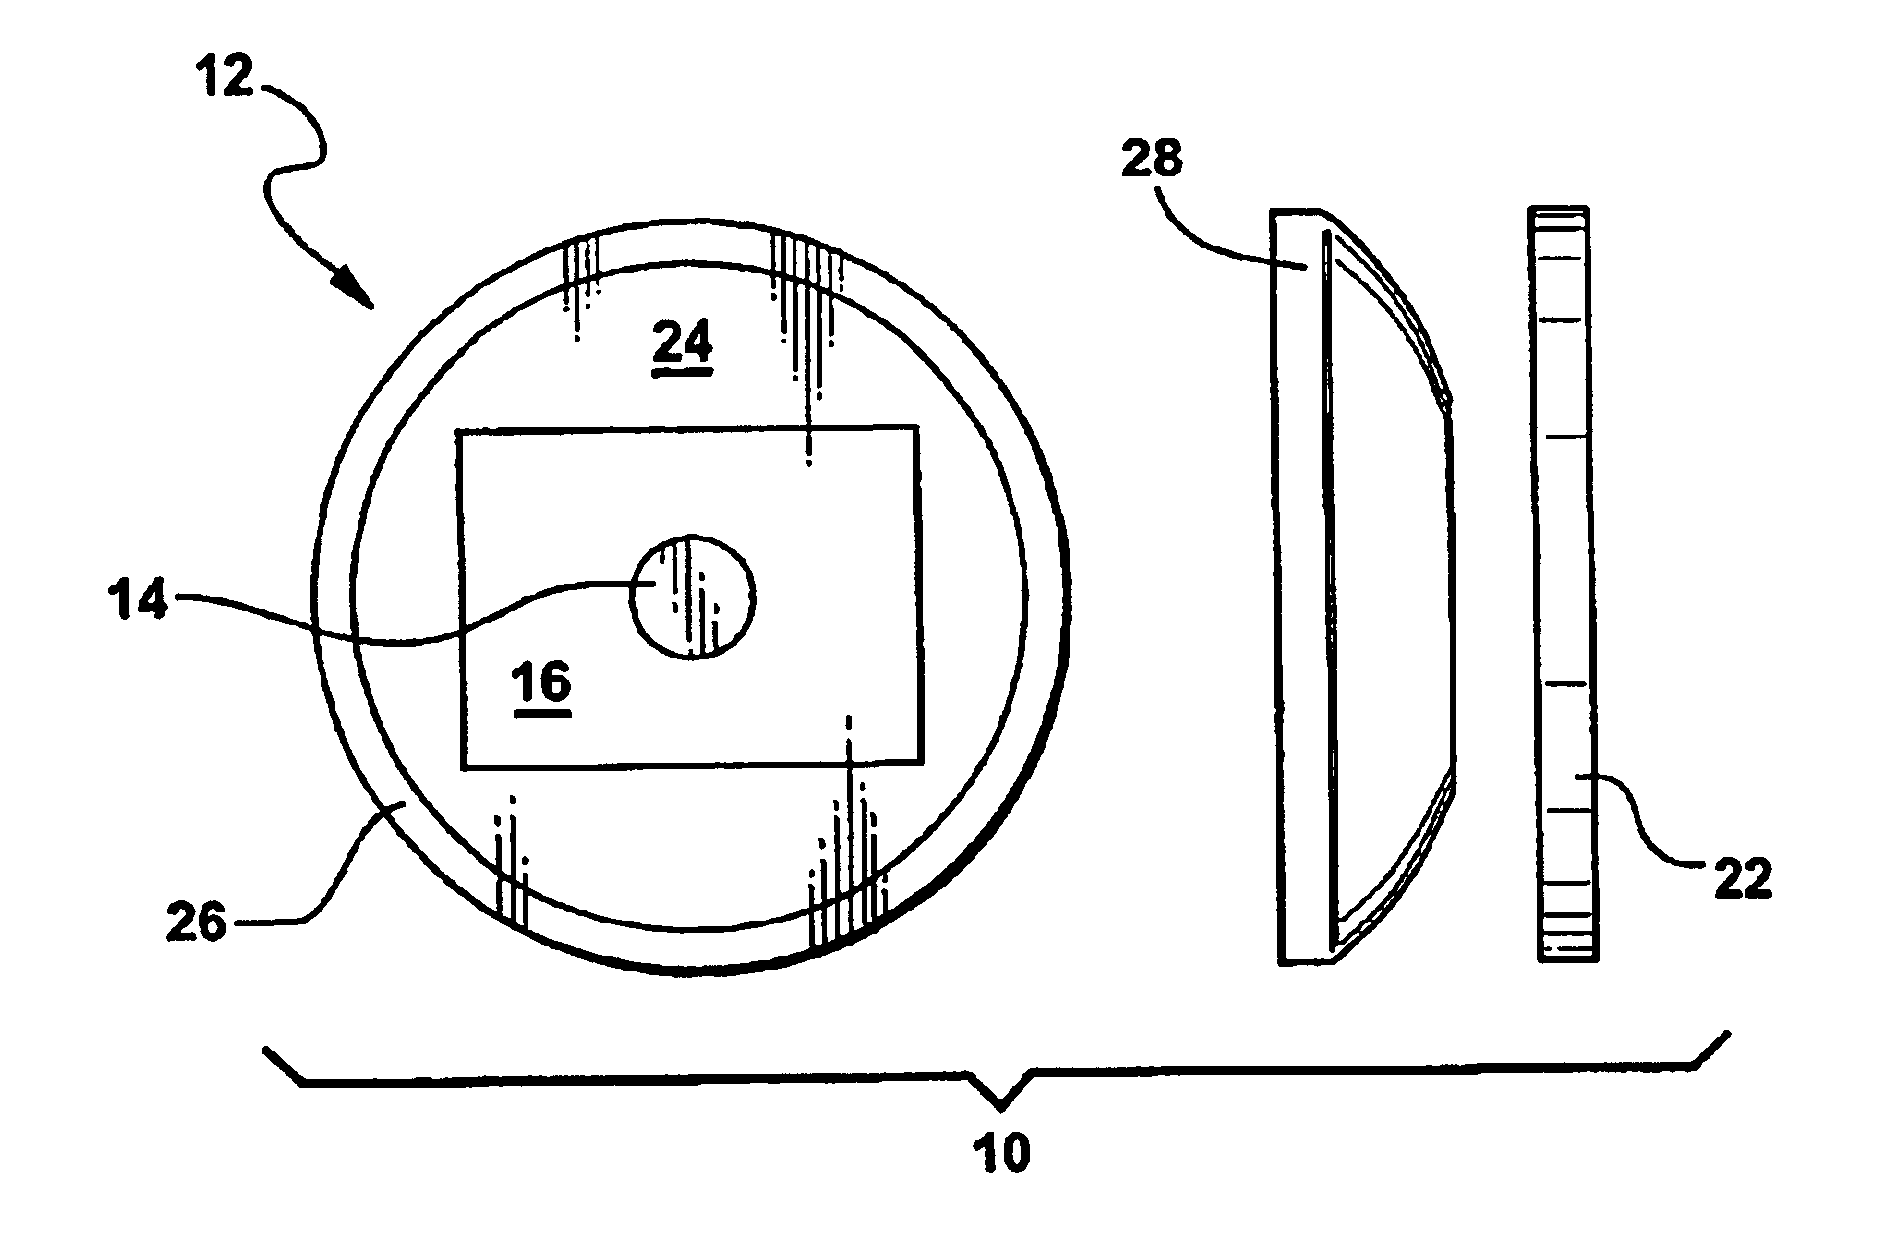 Method of transferring energy in an optical fiber laser structure using energy migration